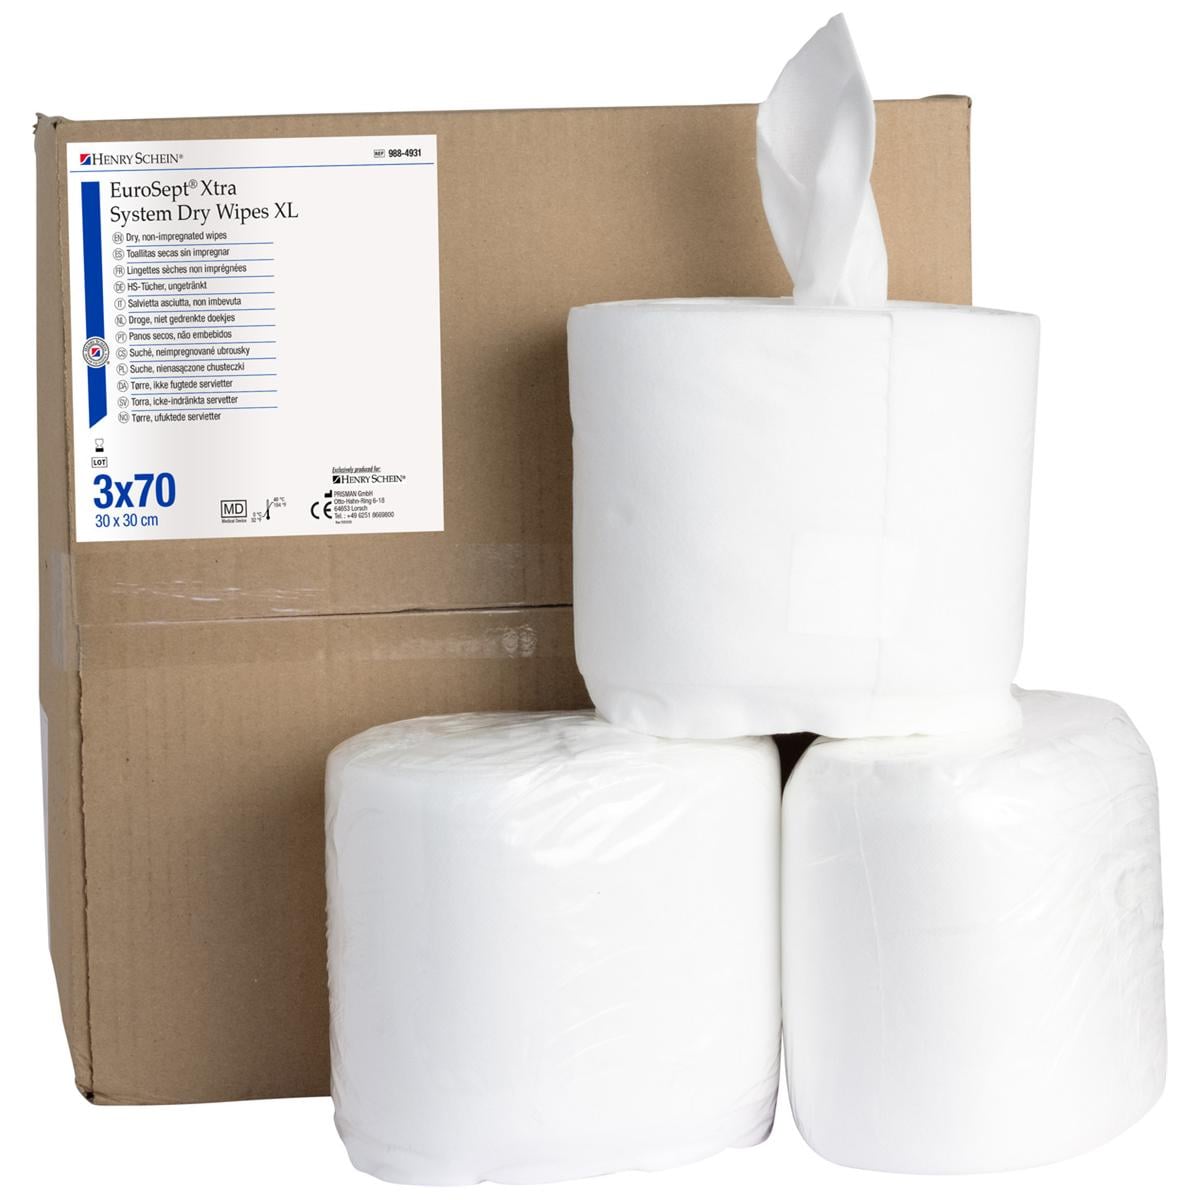 EuroSept Xtra System Dry Wipes Large - Afmeting 30 x 30 cm, 3 Rollen x 70 wipes